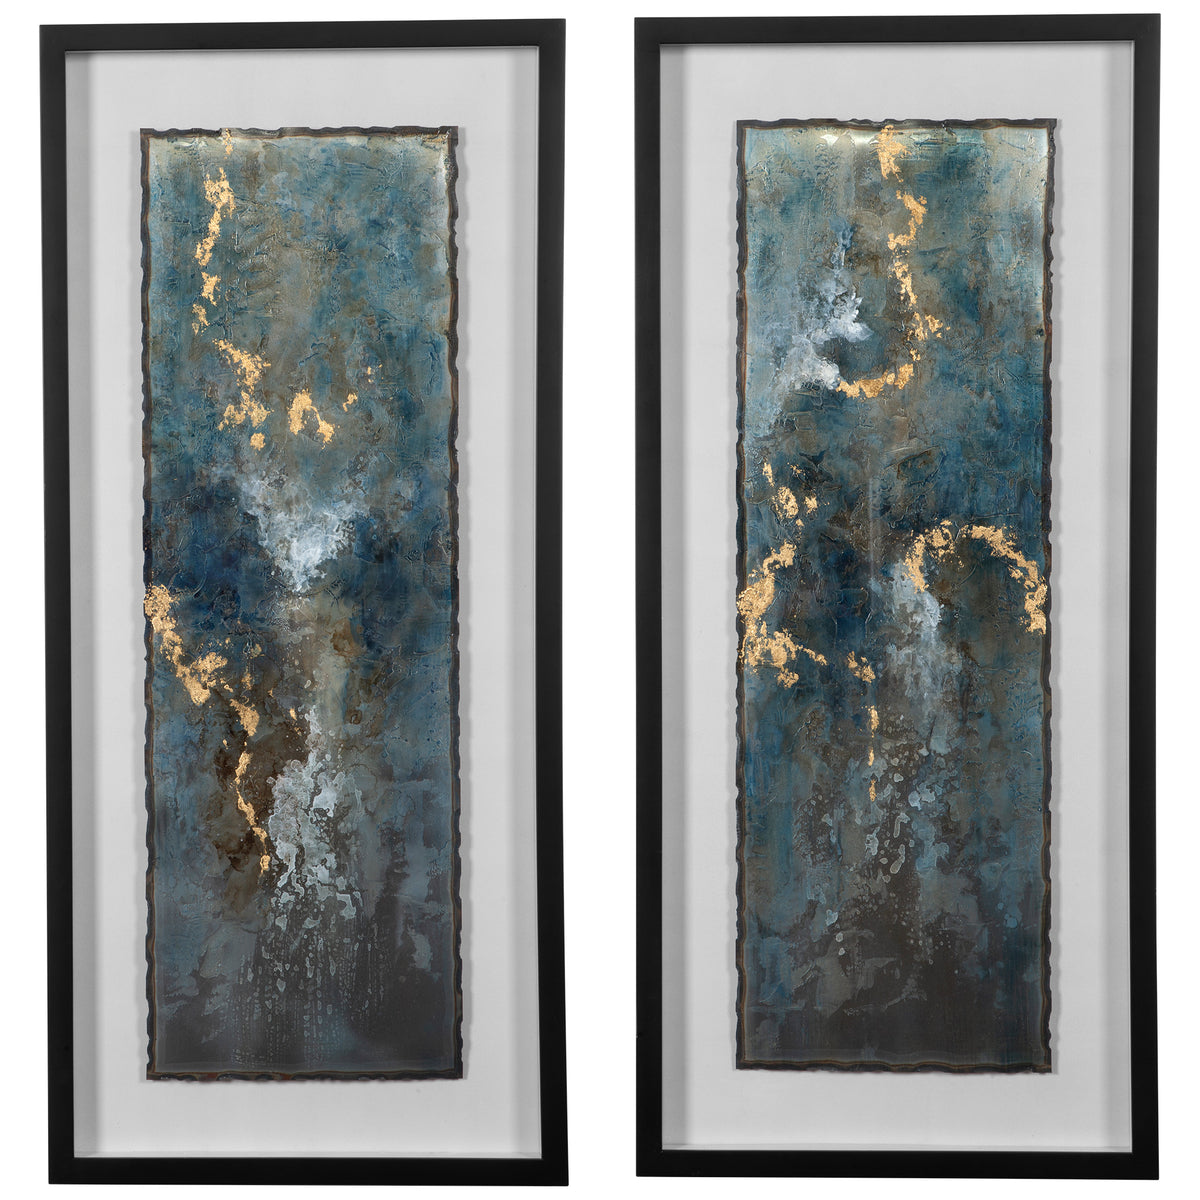 Glimmering Agate Abstract Prints, S/2